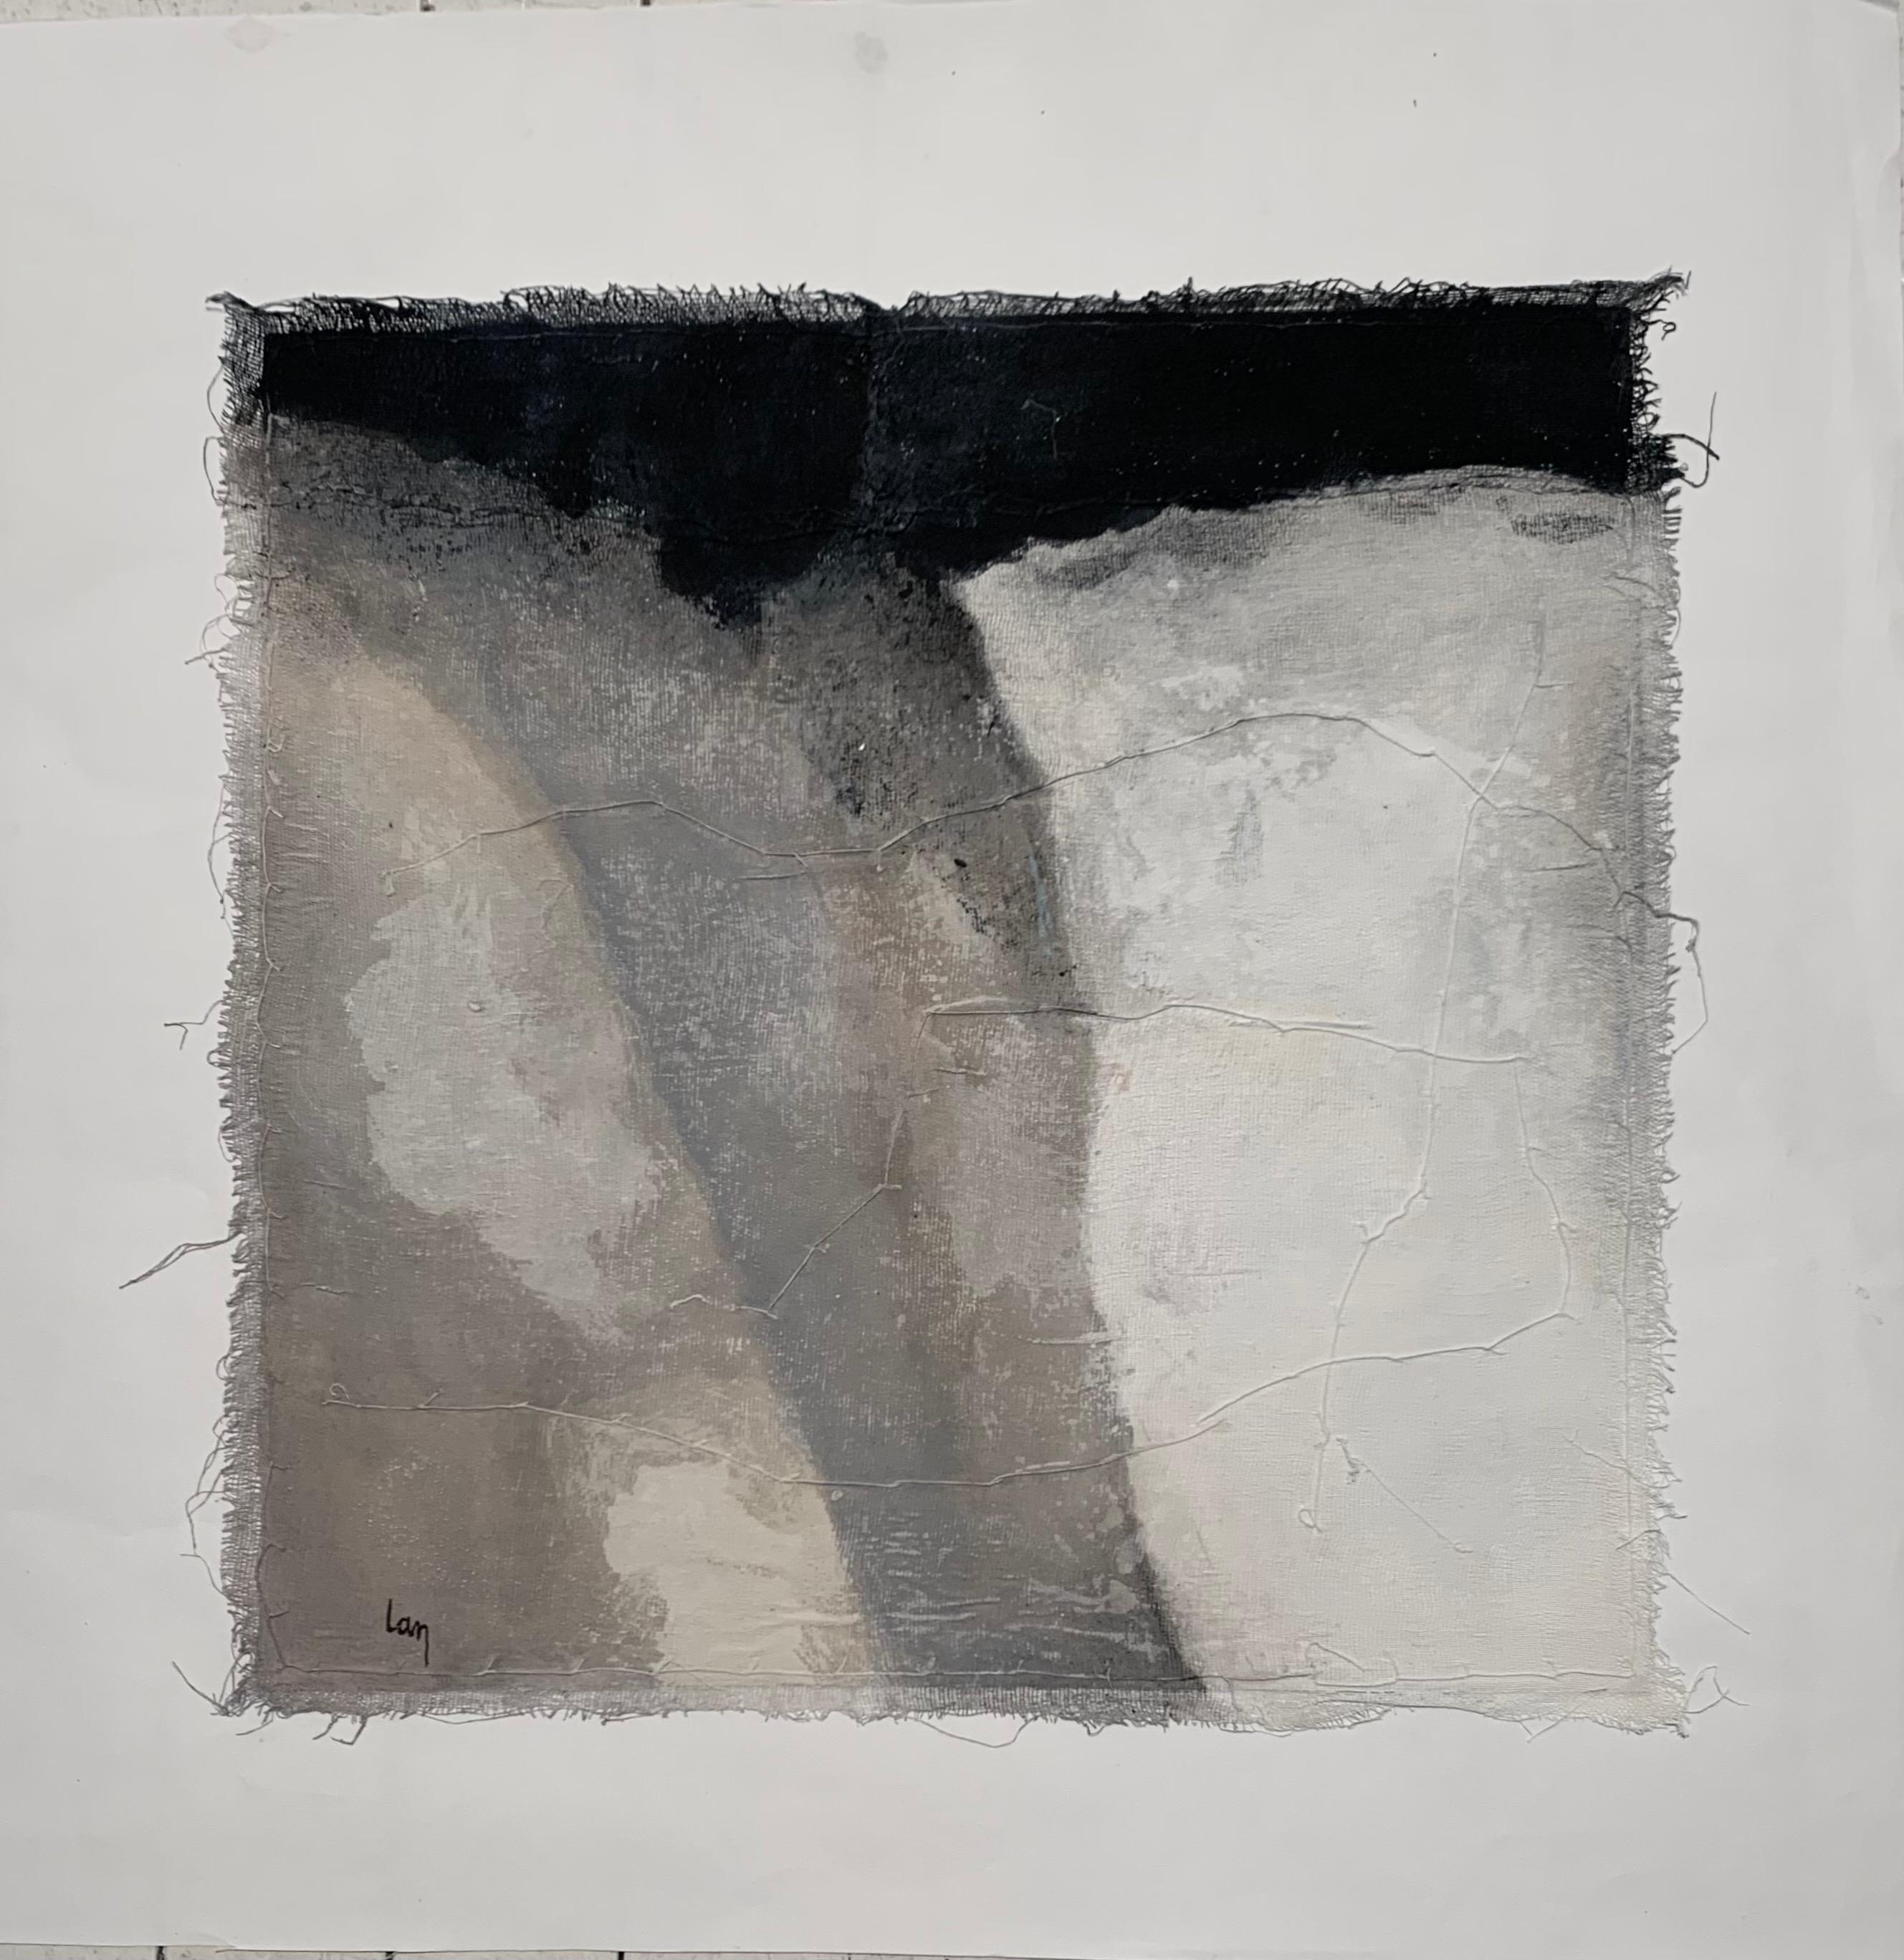 Contemporary Belgian artist Diane Petry creates her own three layer canvas using pima cotton, gauze and fine paper.
Colors are white, grey with horizontal black band at the top.
Raw edges and applied threads add texture and dimension to the